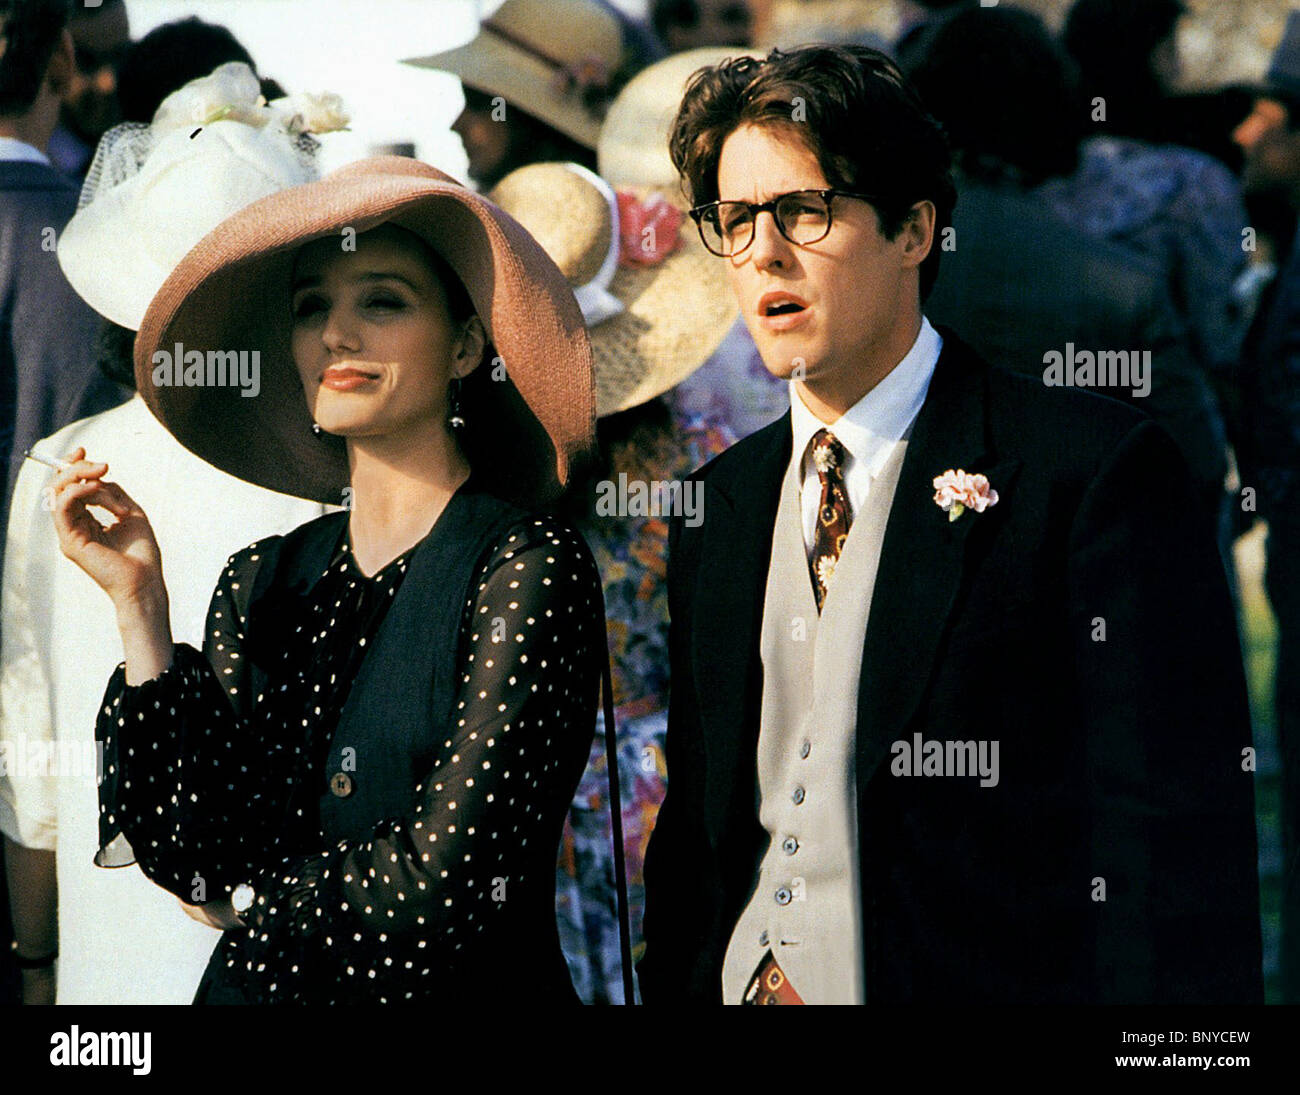 Hugh Grant Charles Hugh Grant High Resolution Stock Photography And Images Alamy